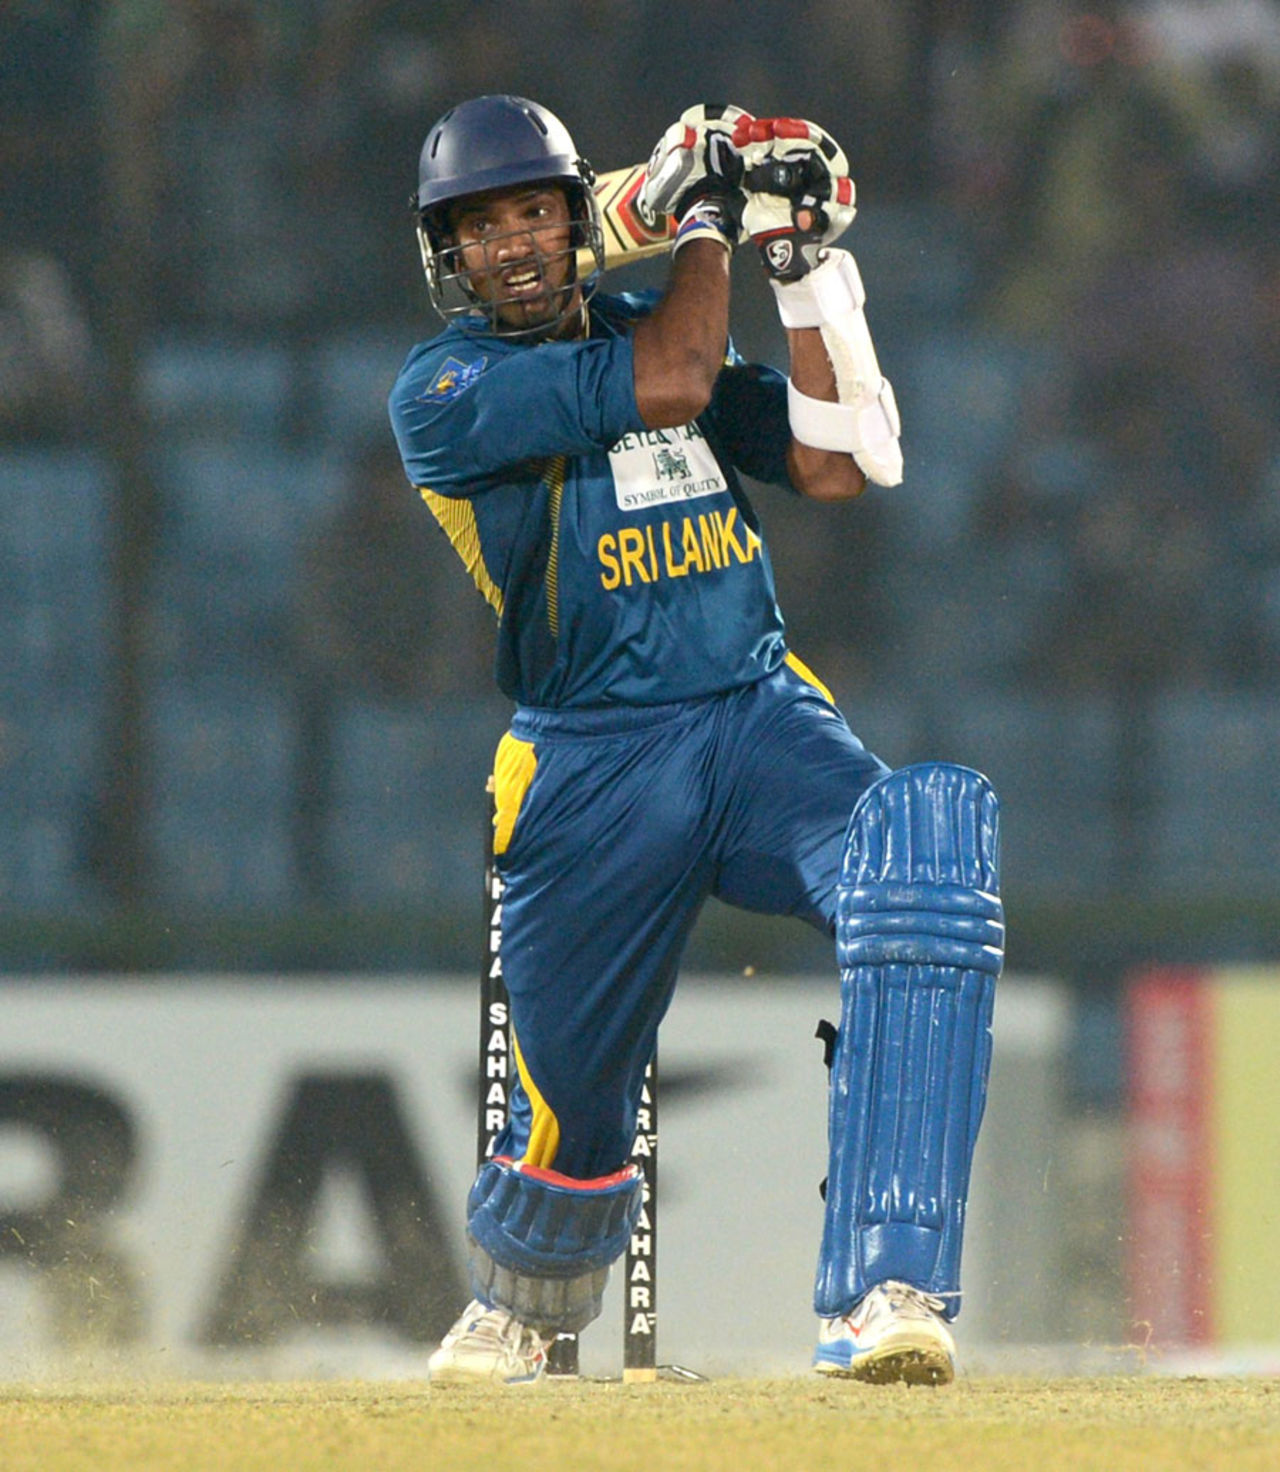 Sachithra Senanayake kept his cool in the final stages of the chase, Bangladesh v Sri Lanka, 2nd T20I, Chittagong, February 14, 2014